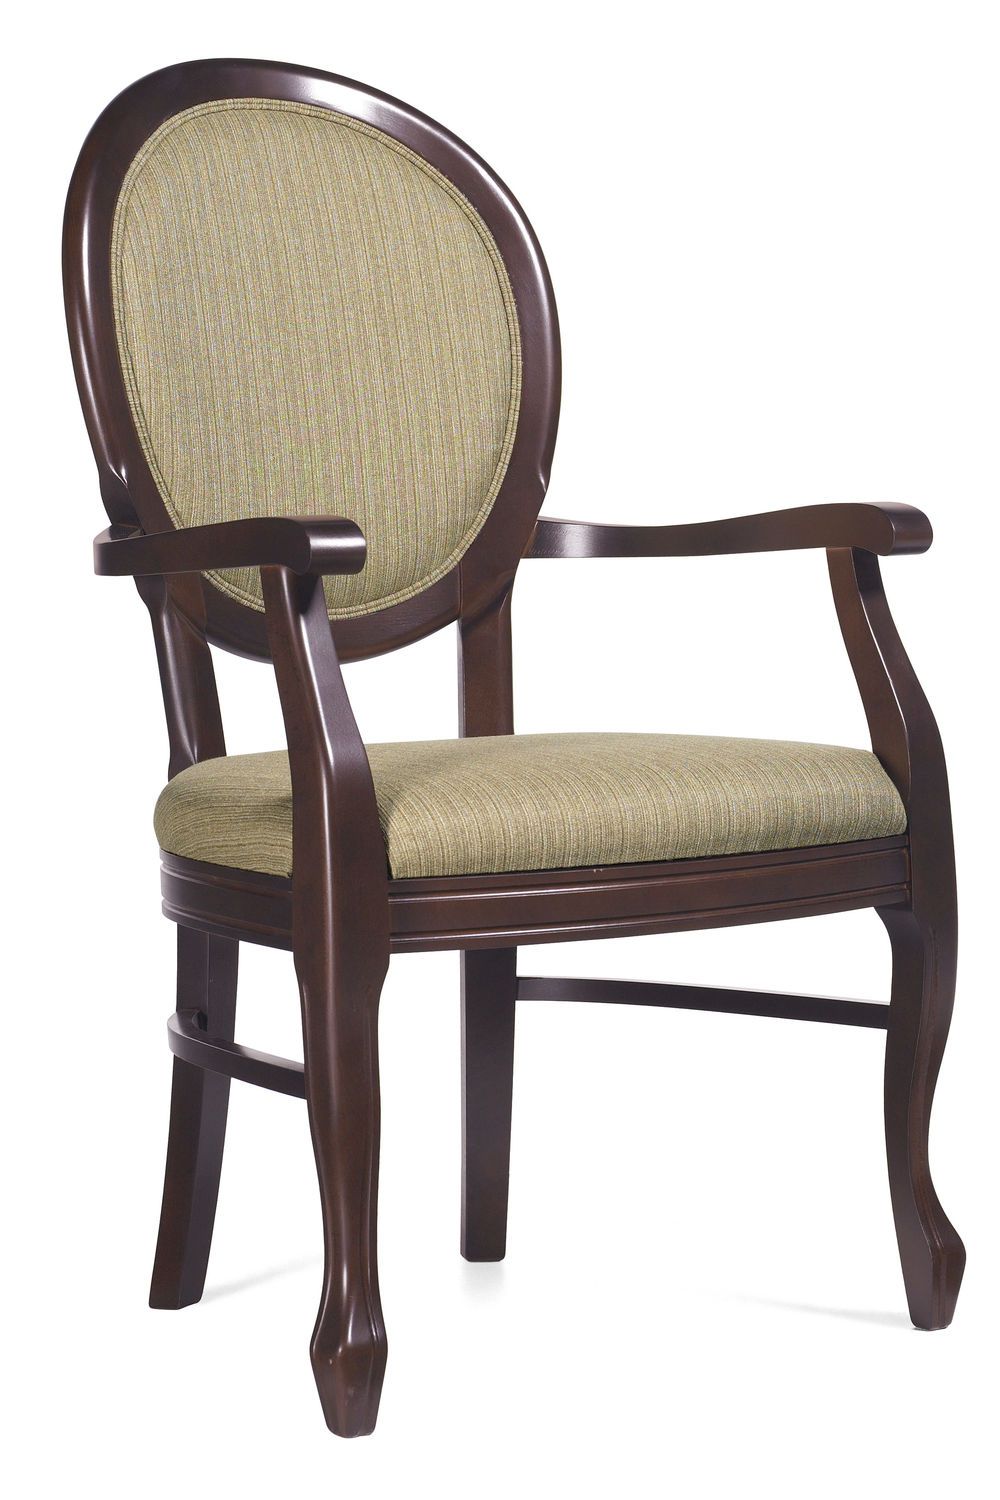 Chair with armrests Birmingham Global Care